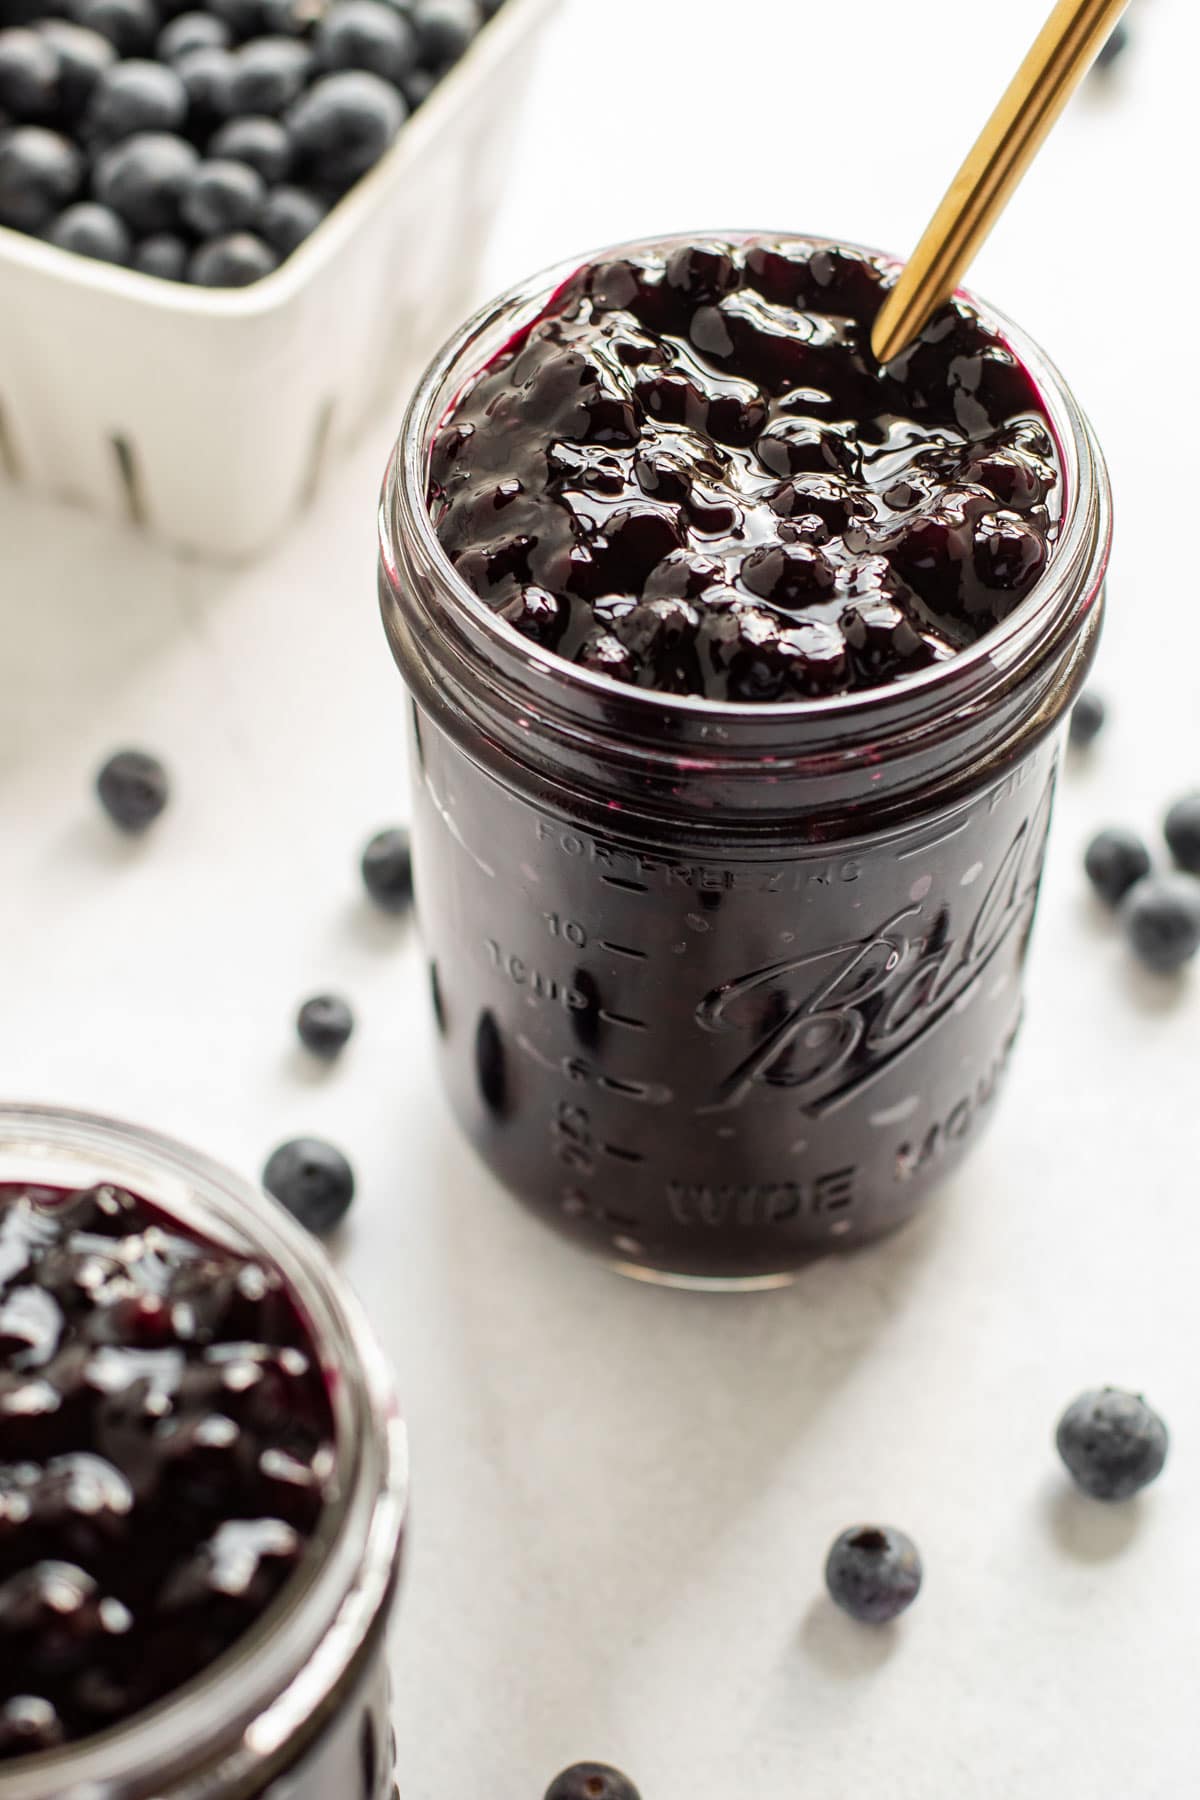 Two jars of blueberry pie filling.